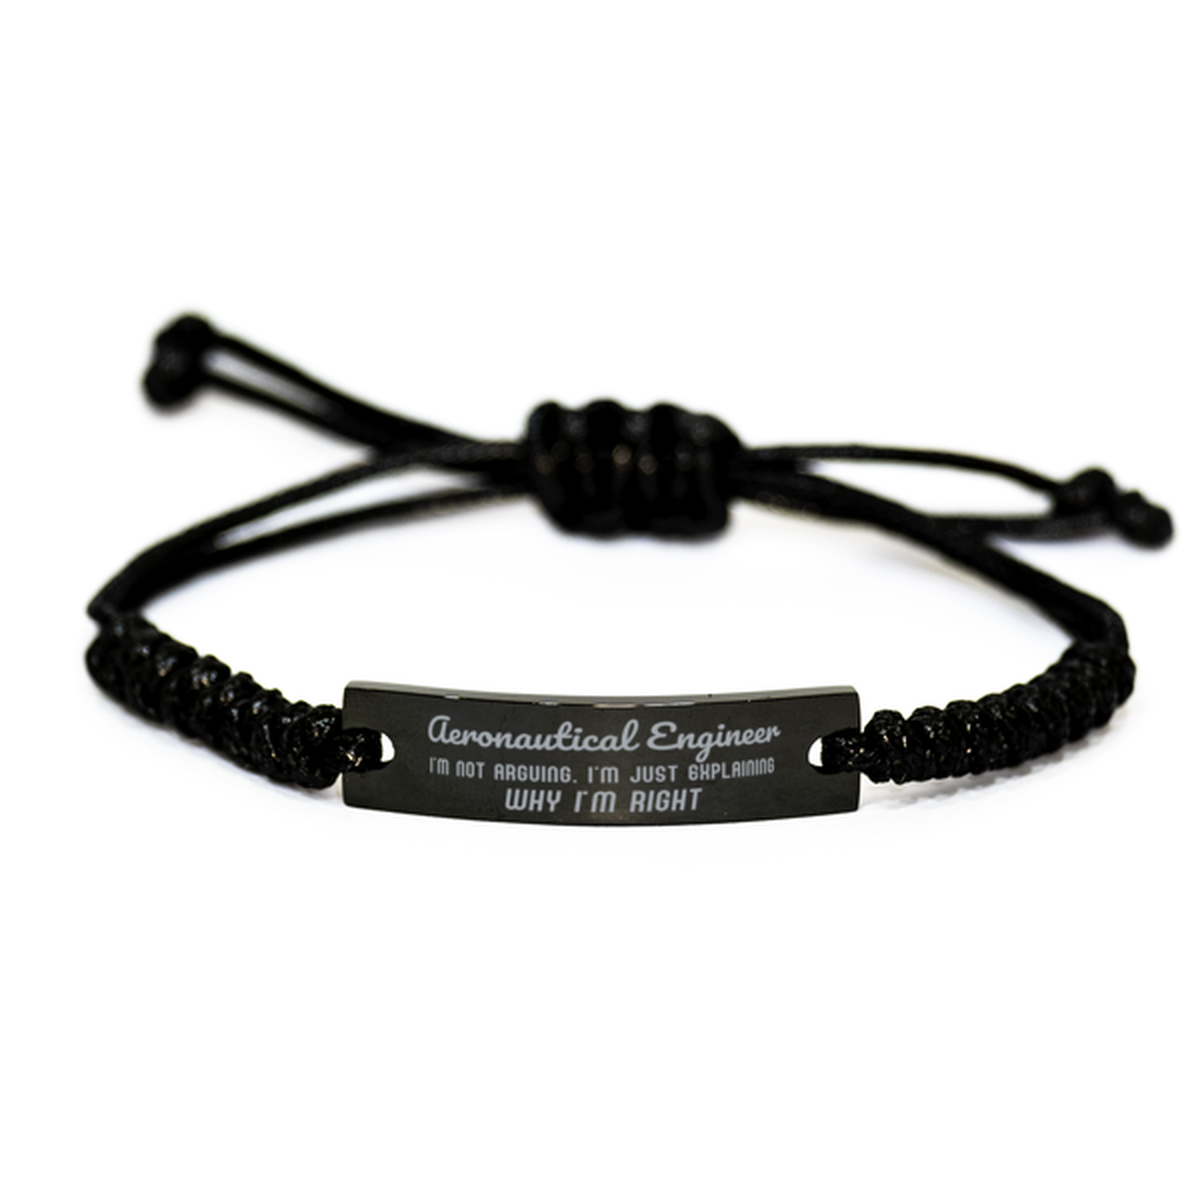 Aeronautical Engineer I'm not Arguing. I'm Just Explaining Why I'm RIGHT Black Rope Bracelet, Funny Saying Quote Aeronautical Engineer Gifts For Aeronautical Engineer Graduation Birthday Christmas Gifts for Men Women Coworker